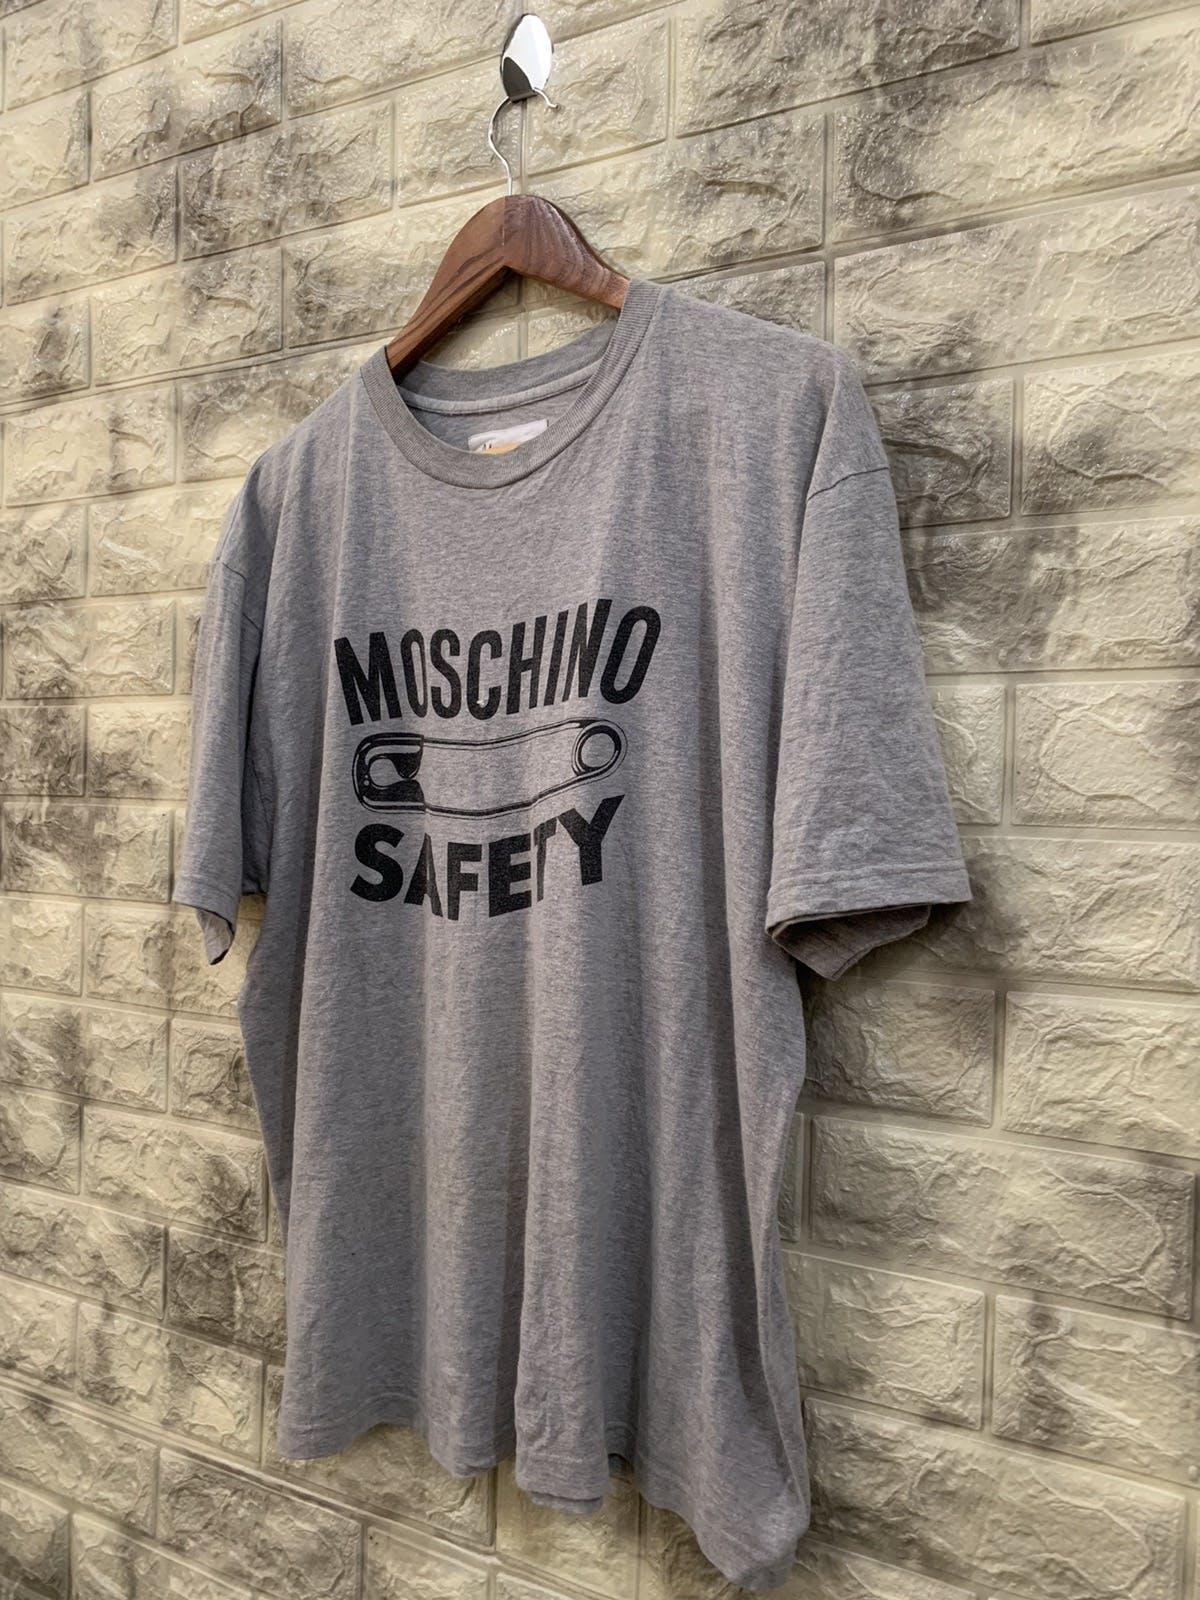 Moschino Safety graphic tee - 4